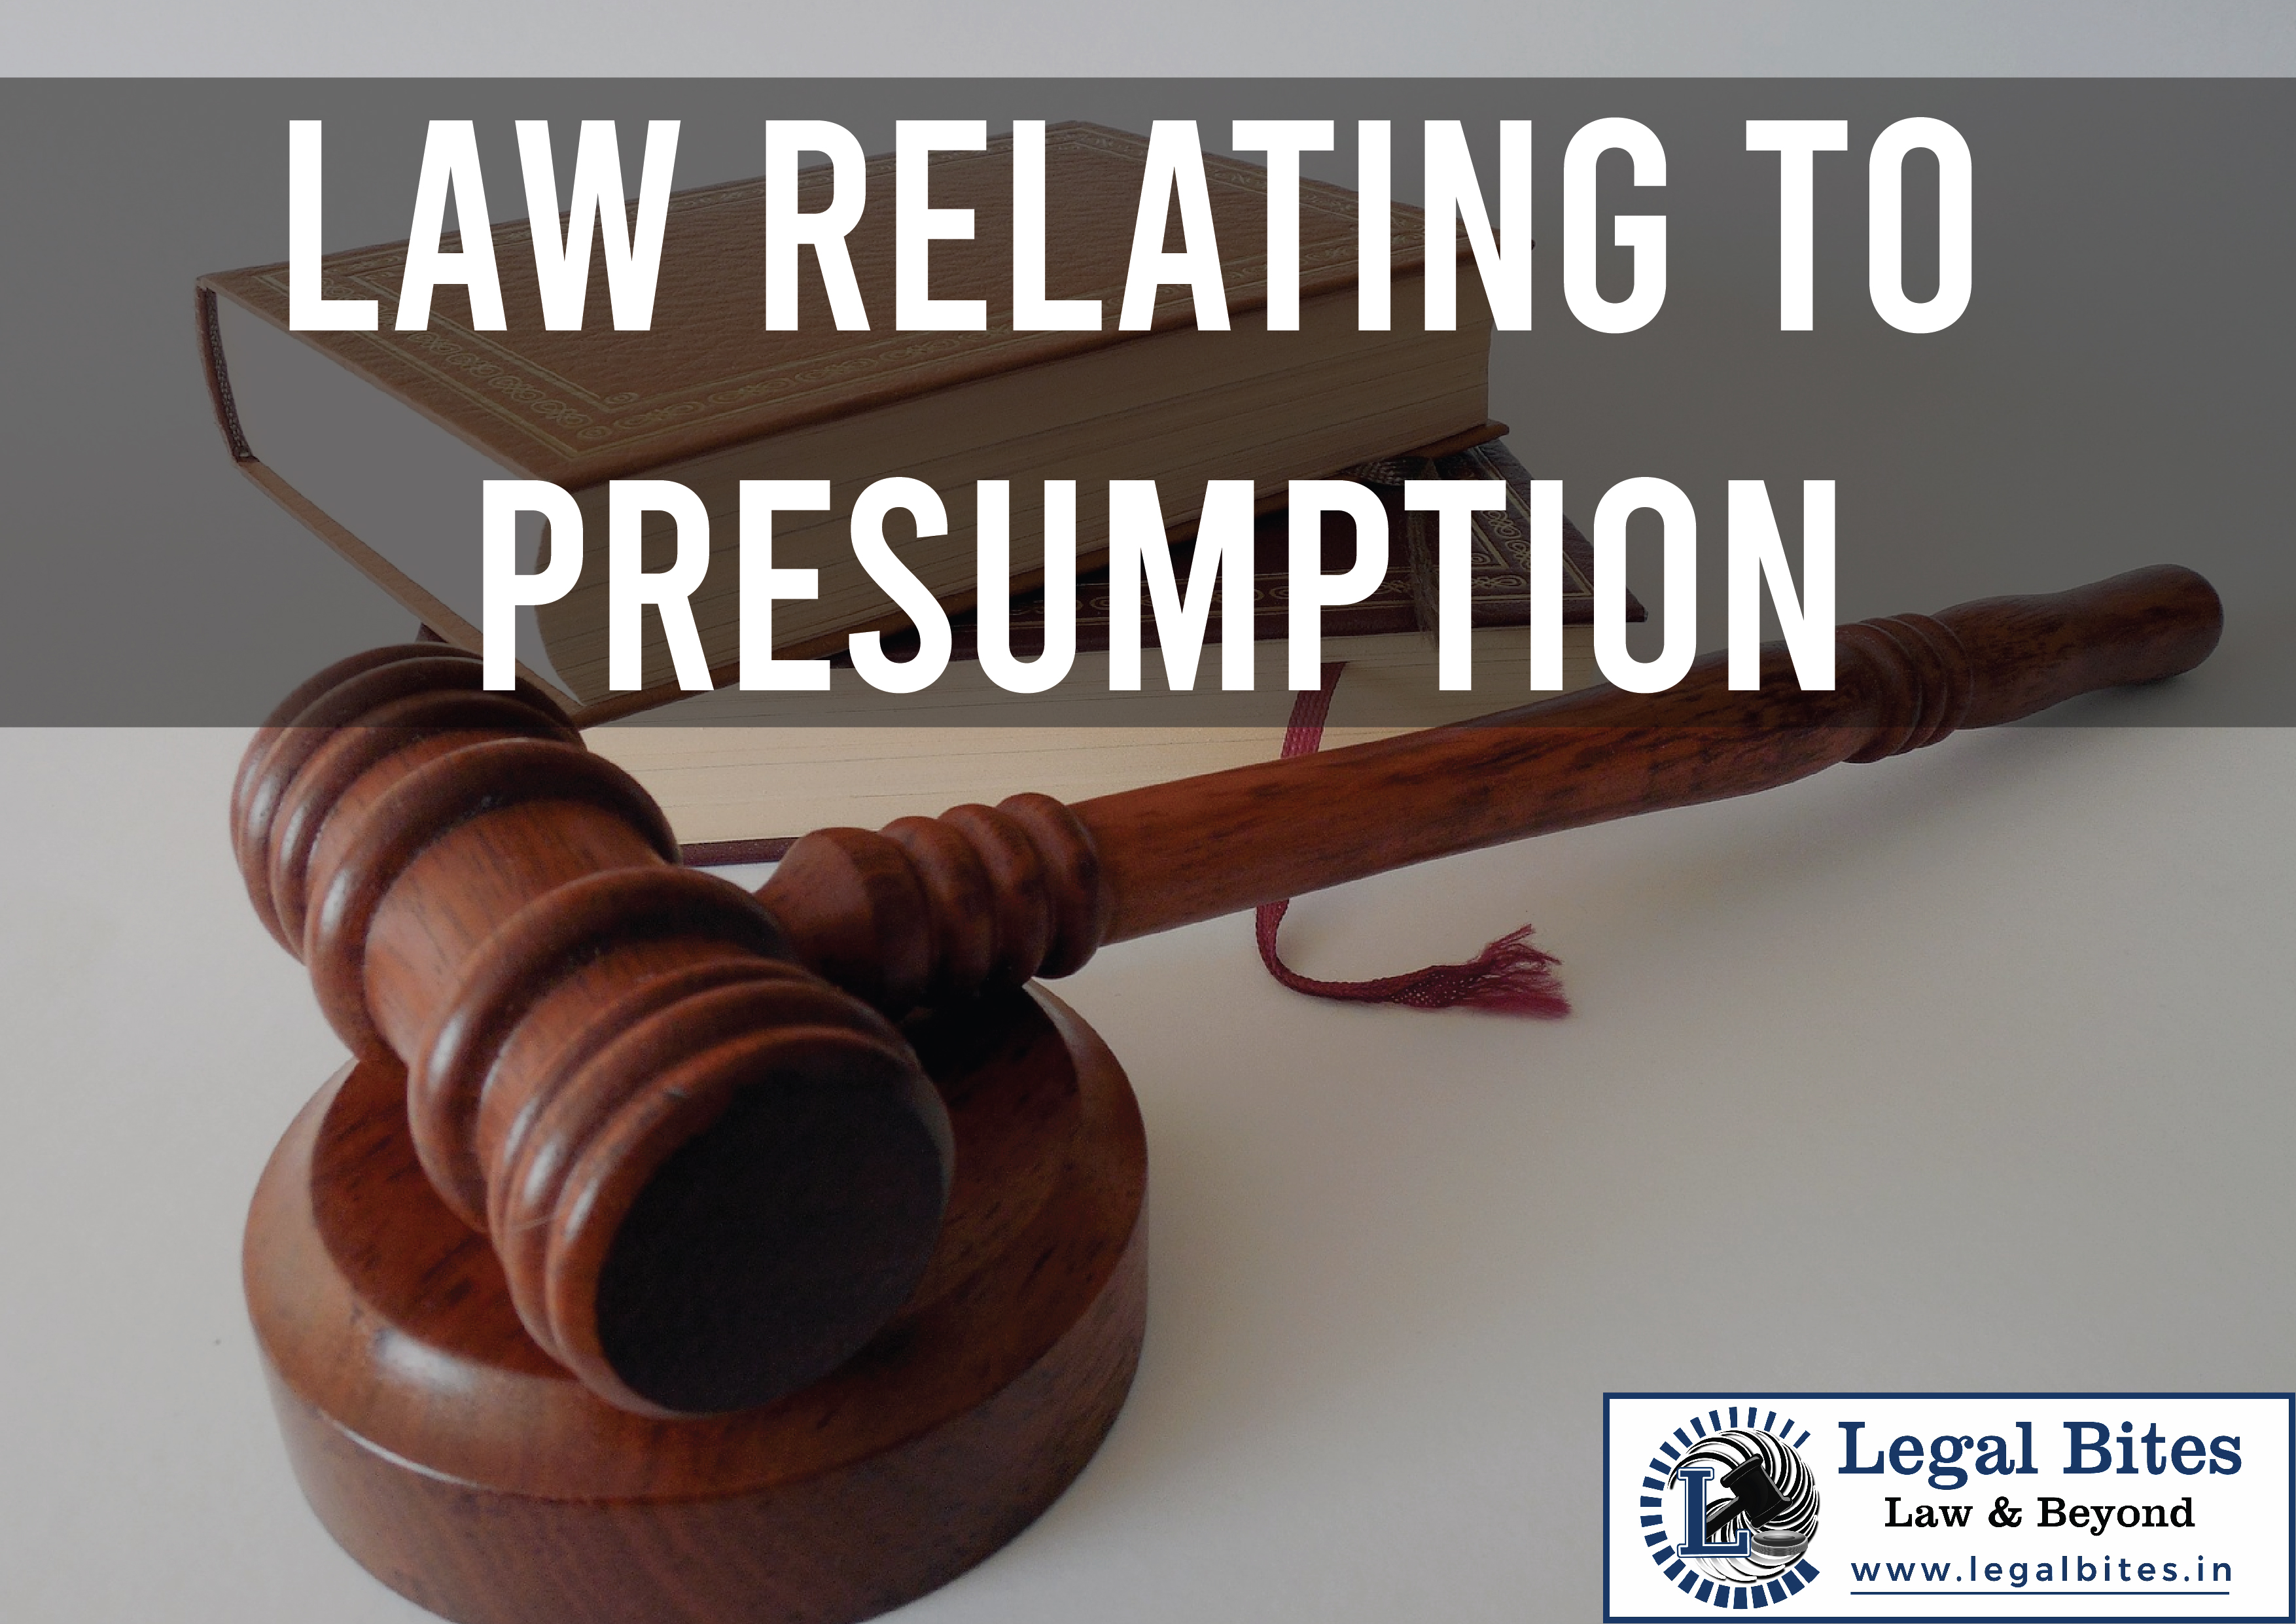 Law relating to Presumption